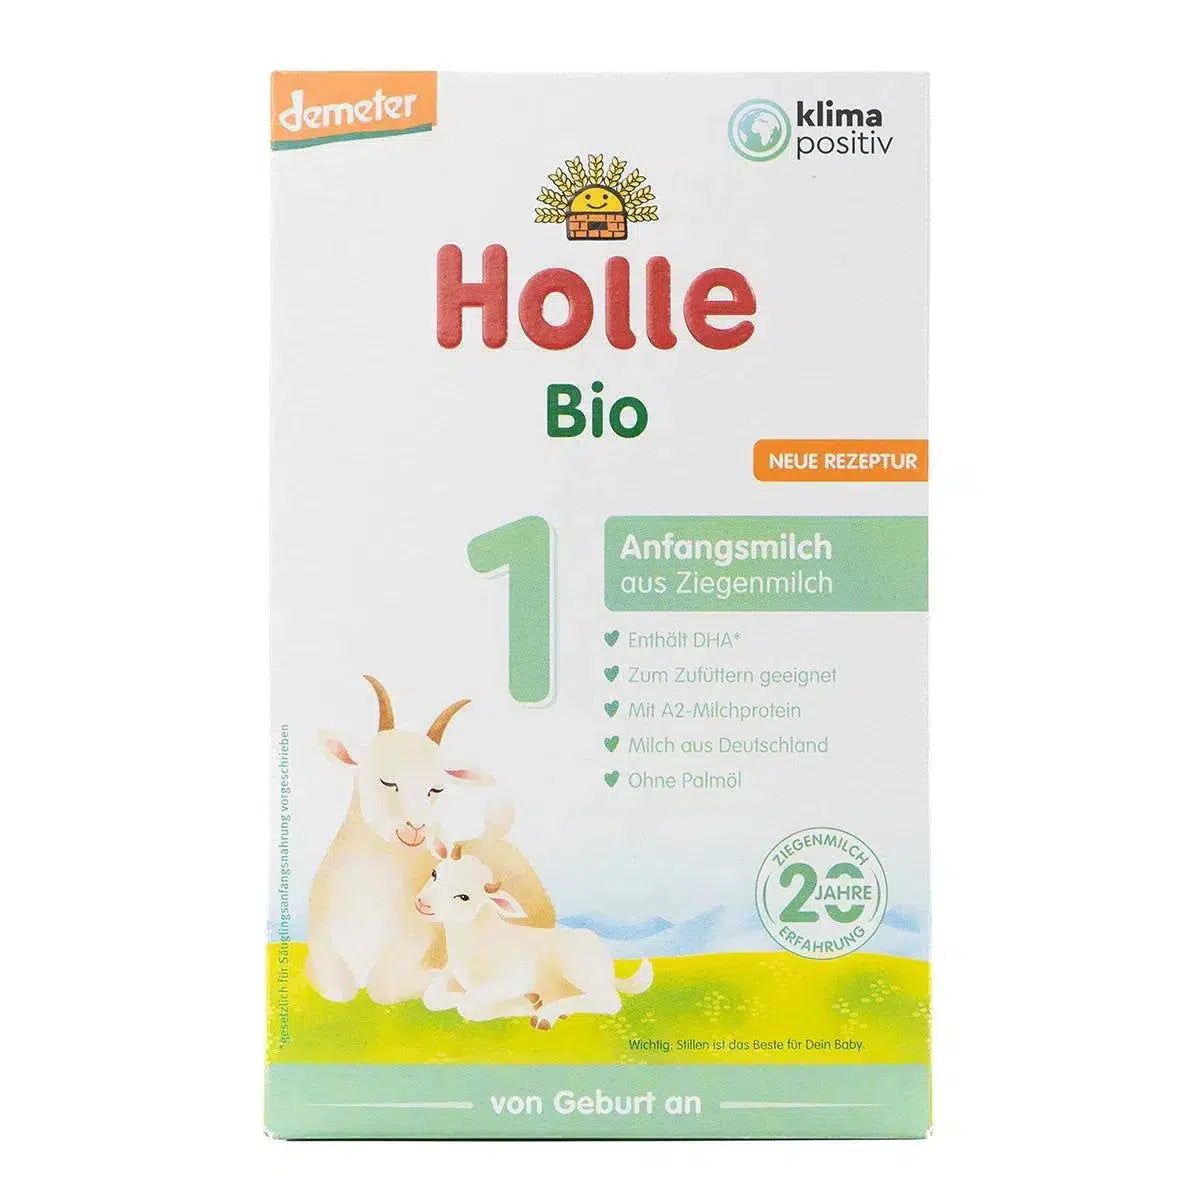 Promo Product: Holle Goat - Buy 4 Get 5